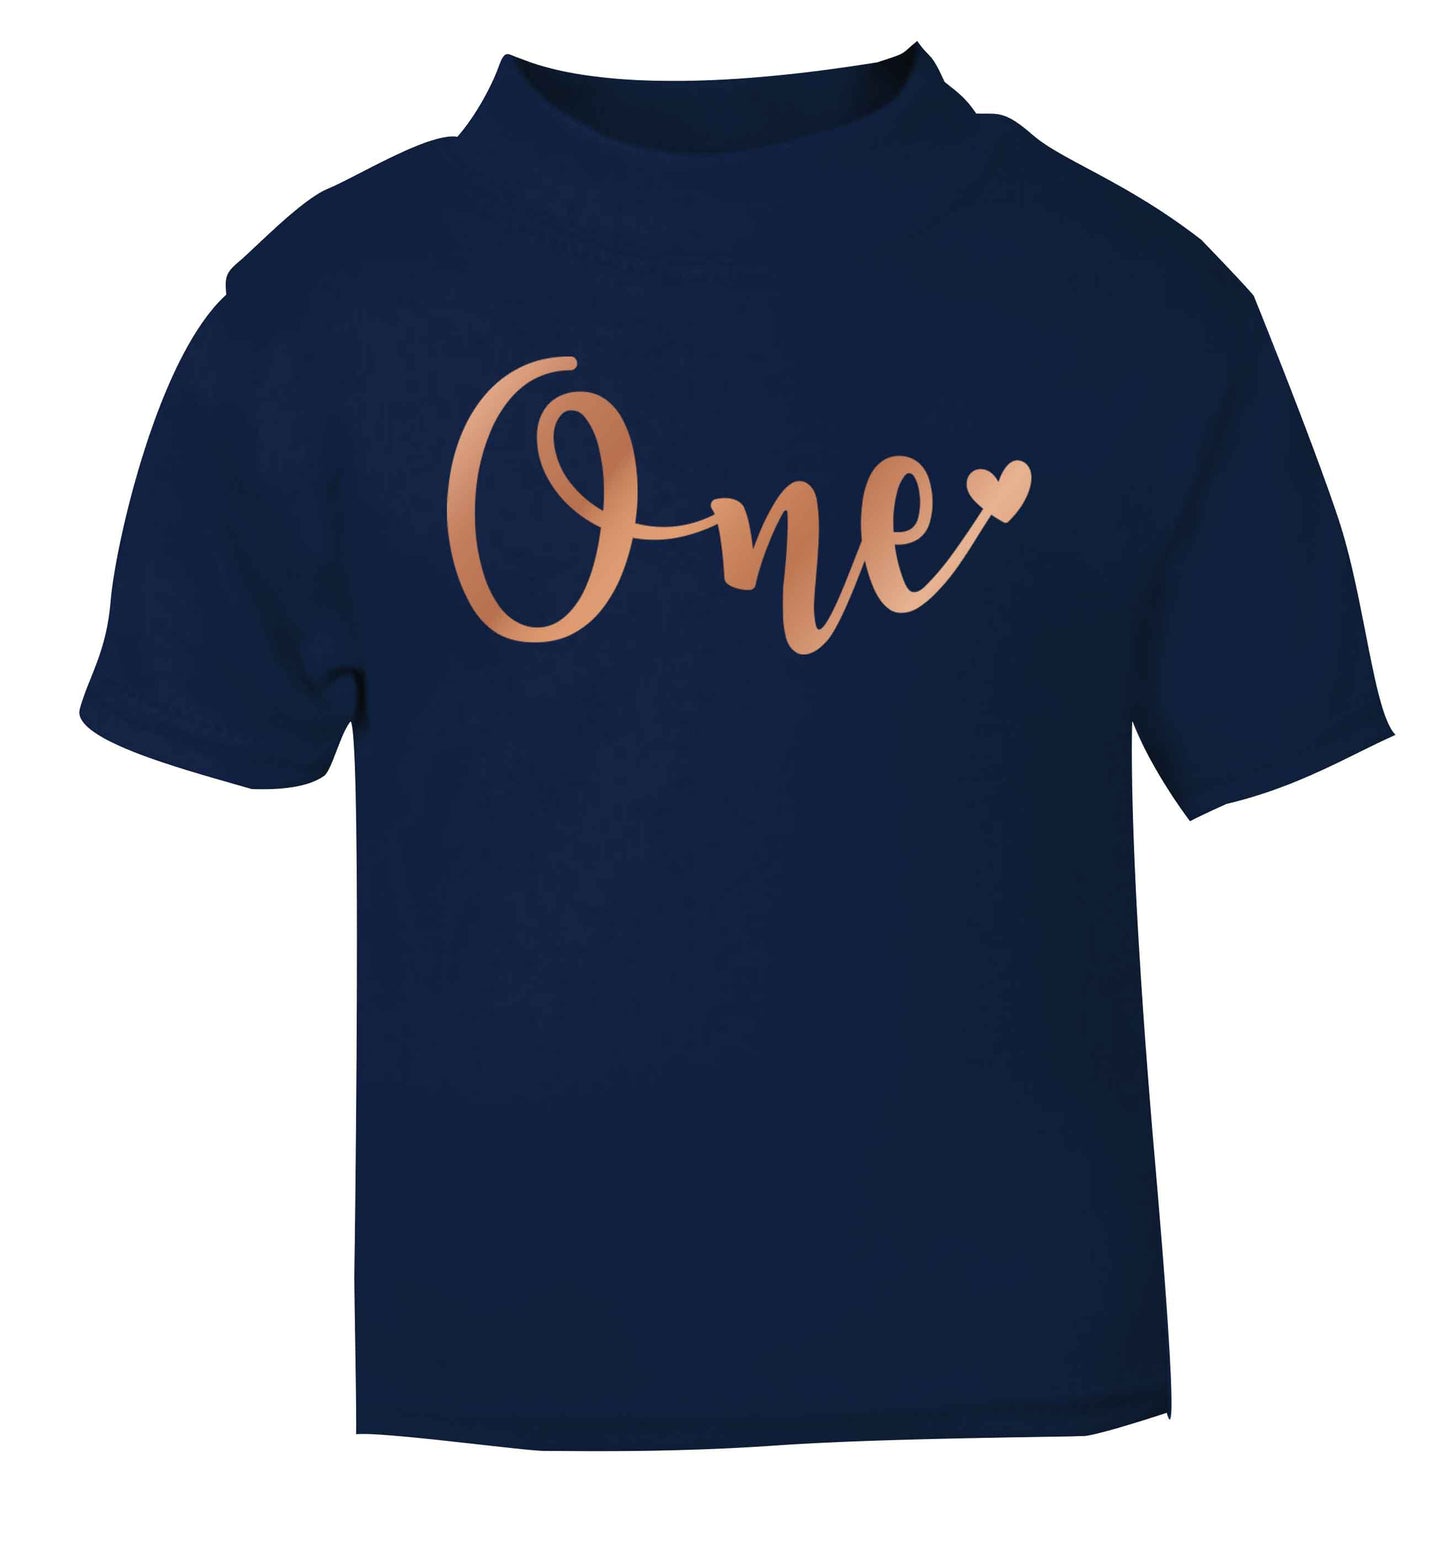 Rose Gold One navy baby toddler Tshirt 2 Years